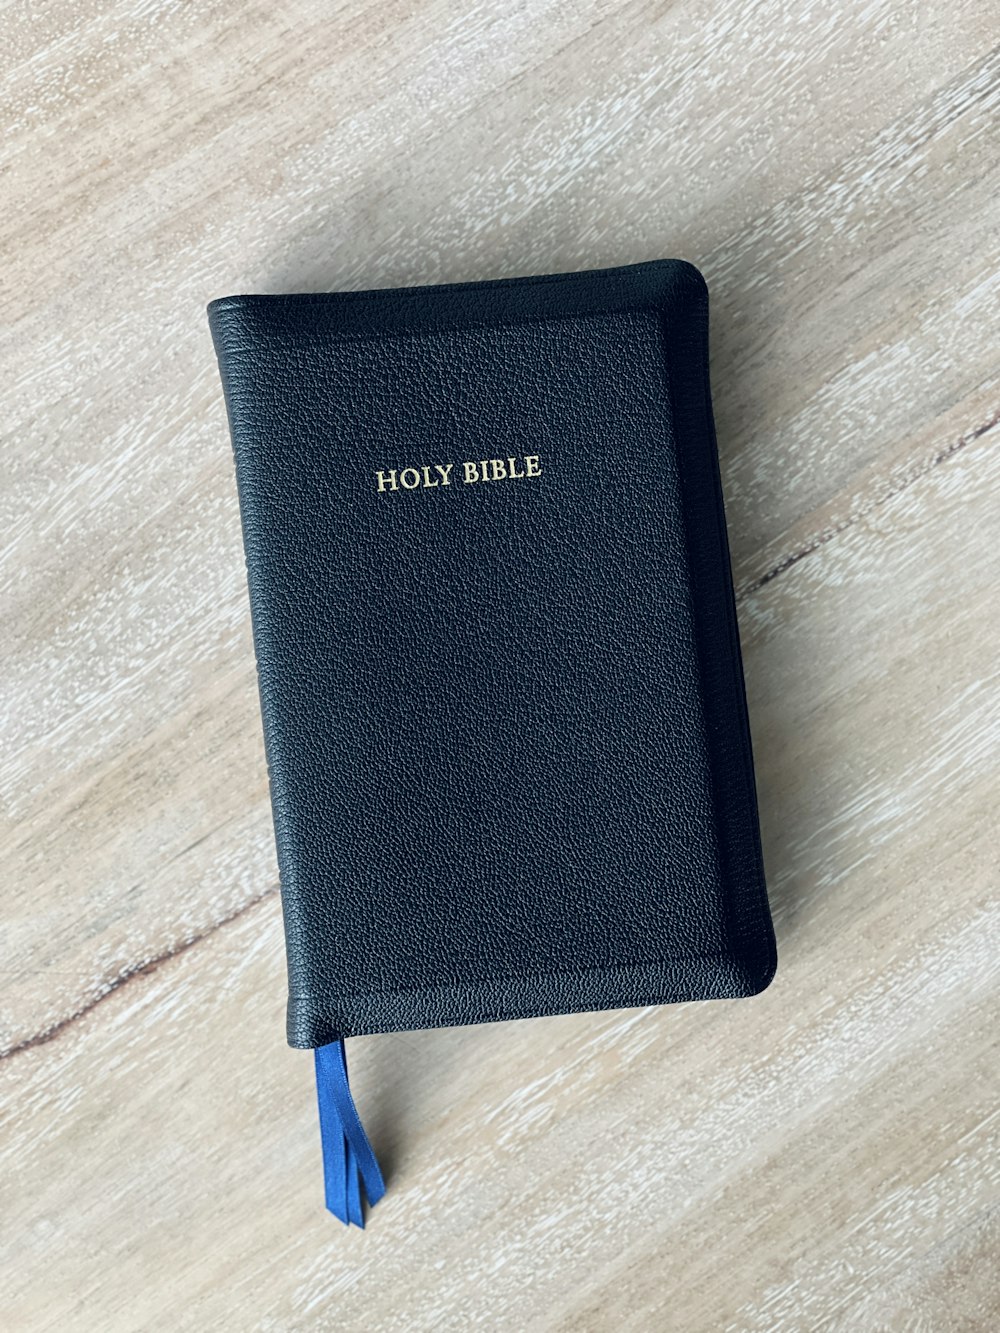 a black bible on a wooden table with a blue tassel